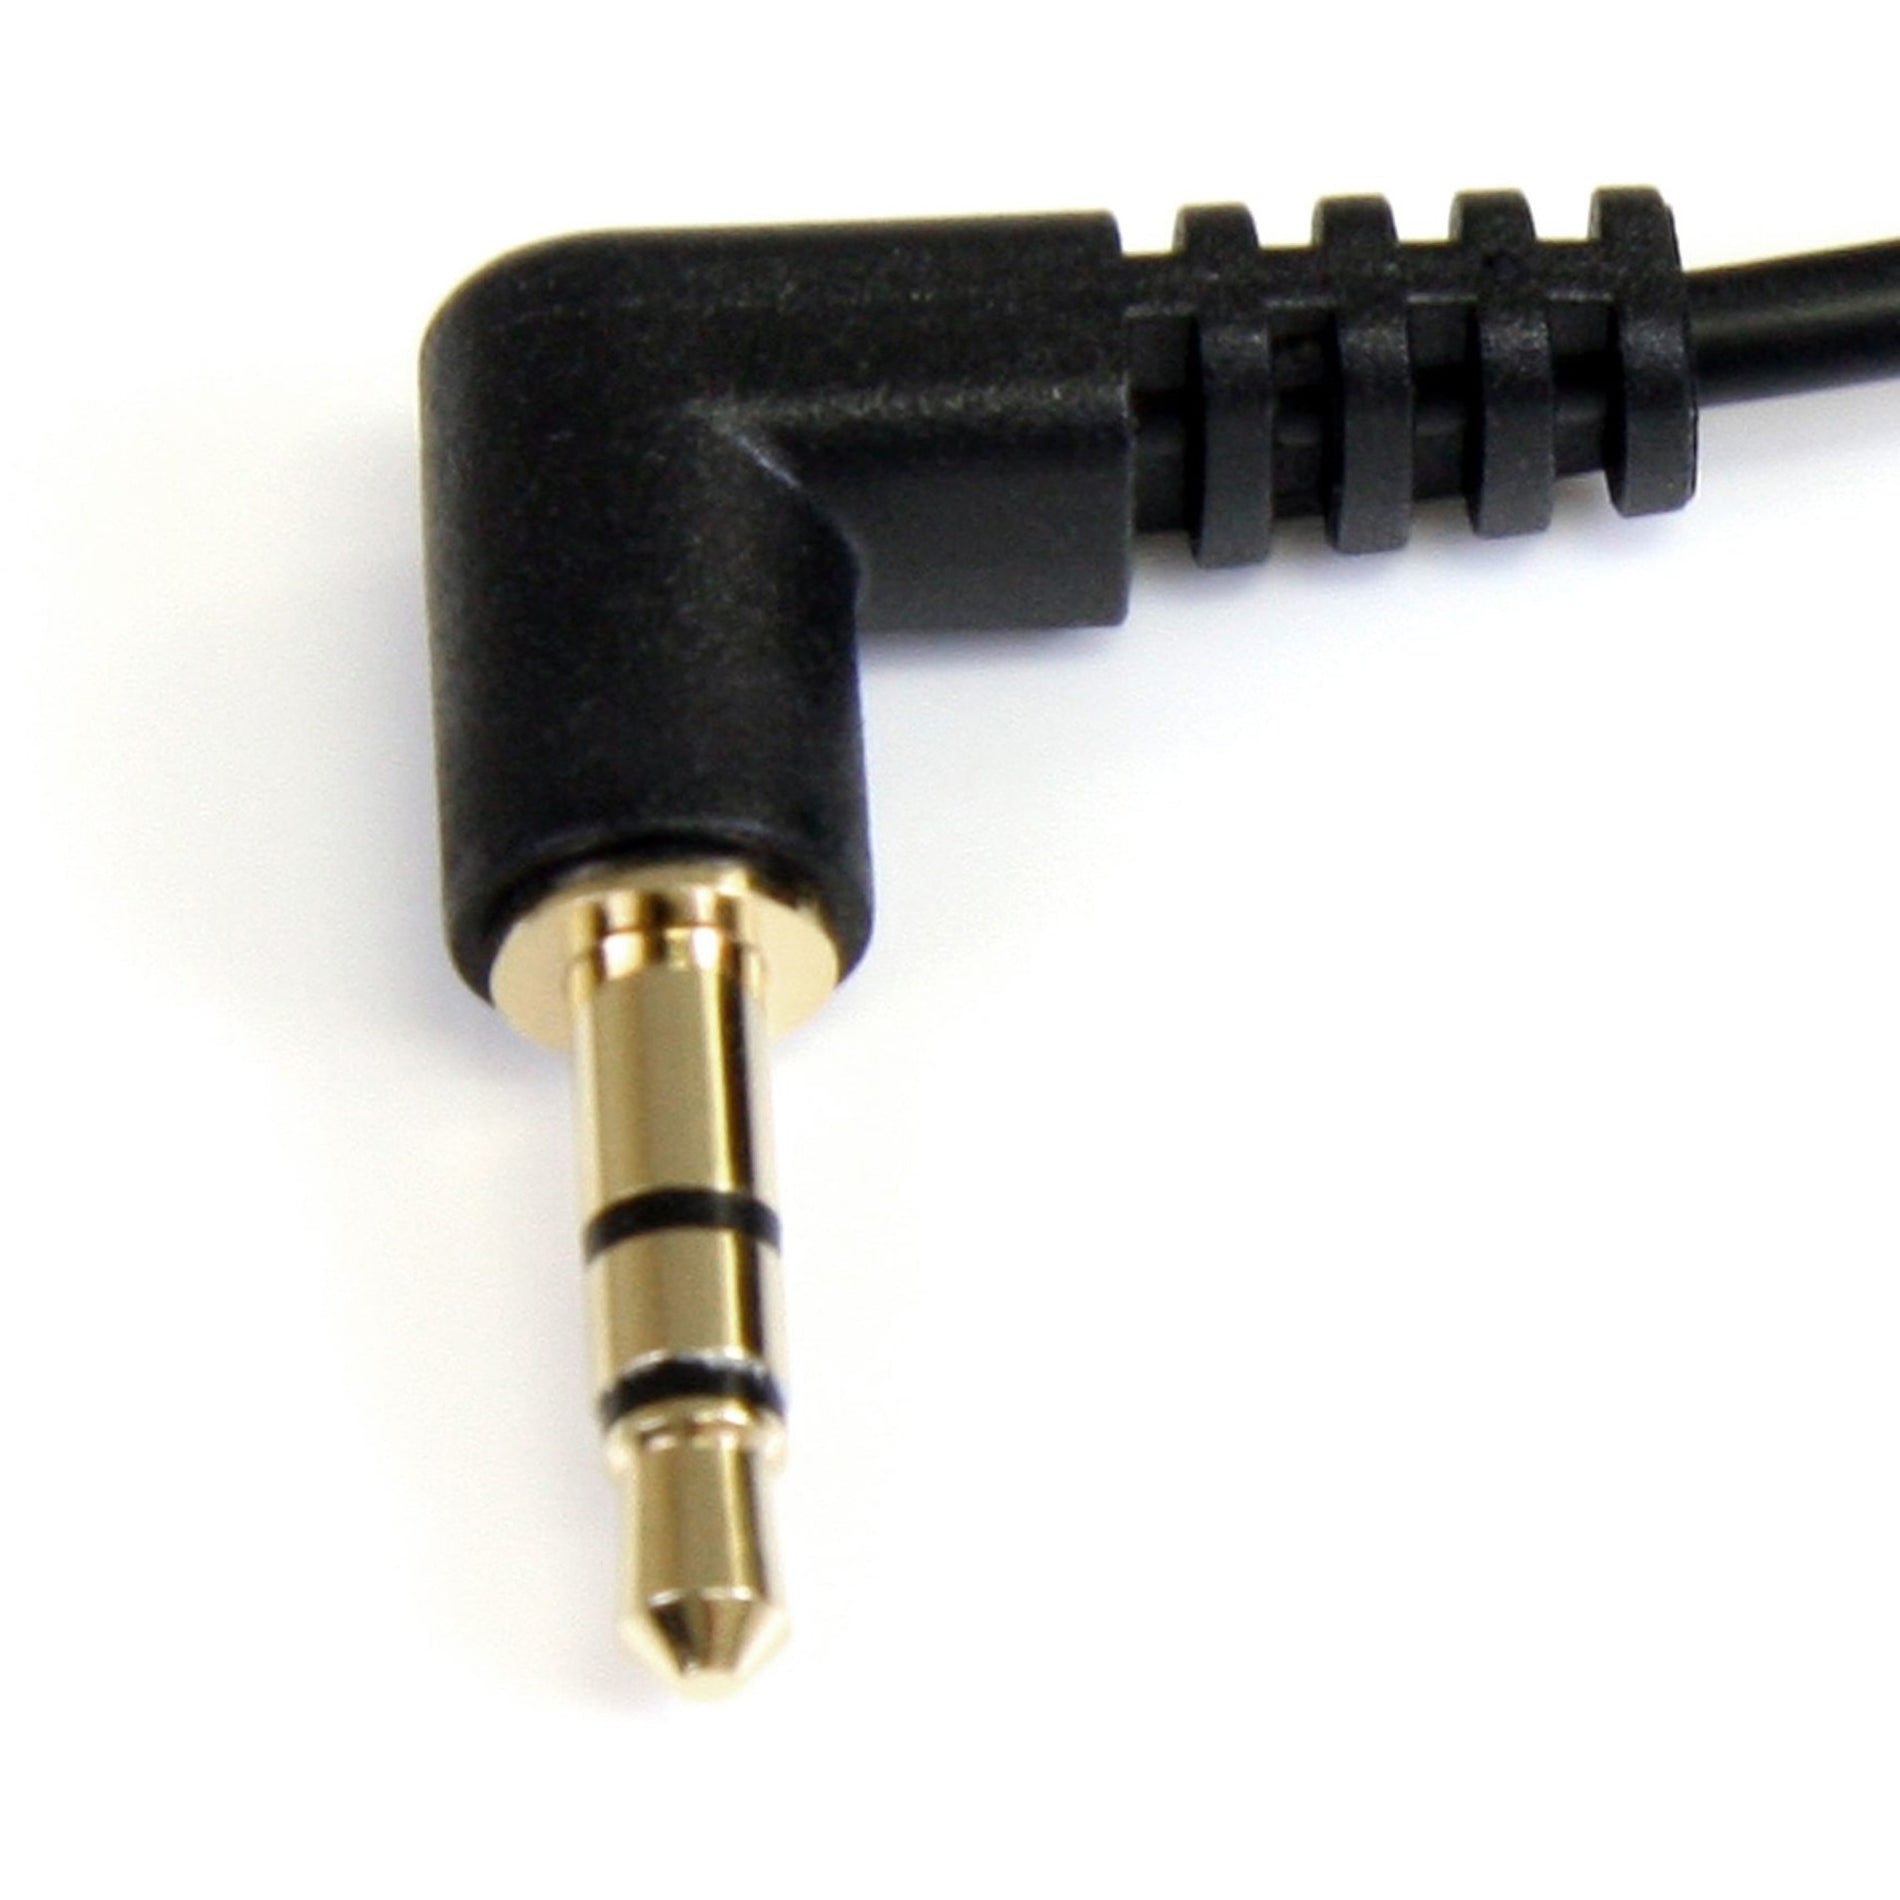 StarTech.com MU3MMS2RA 3 ft Slim 3.5mm Right Angle Stereo Audio Cable - M/M, Gold Plated, Strain Relief